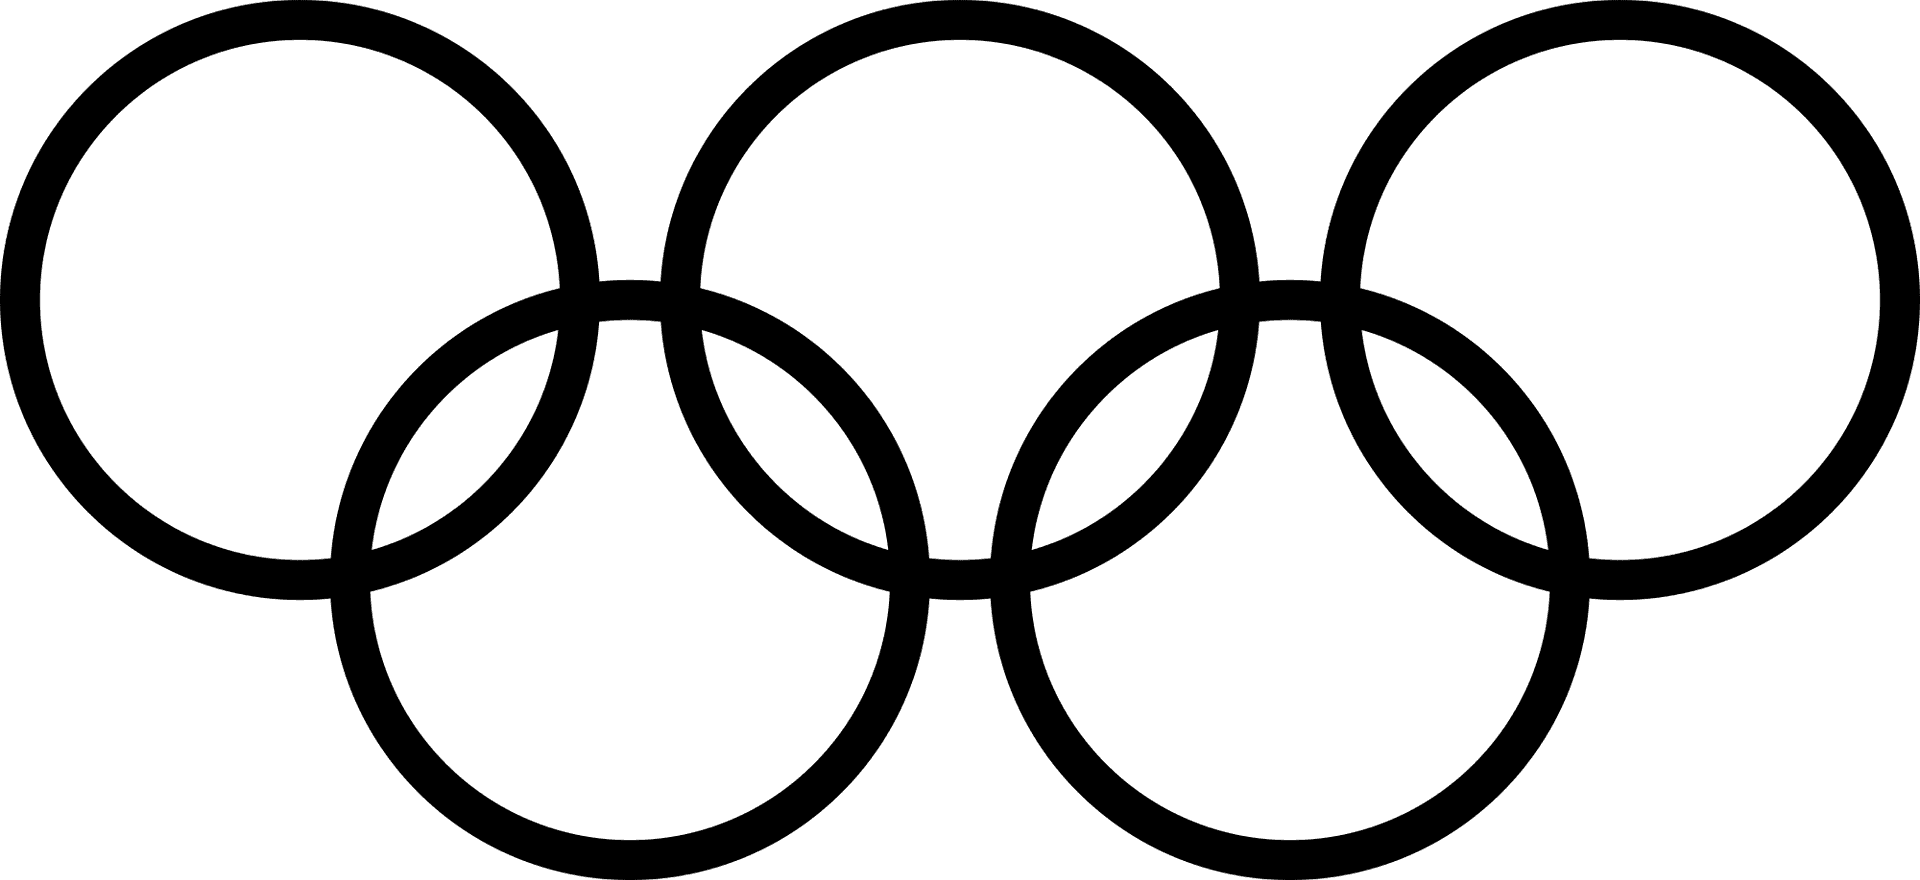 Olympic_ Rings_ Symbol_ Black_and_ White PNG